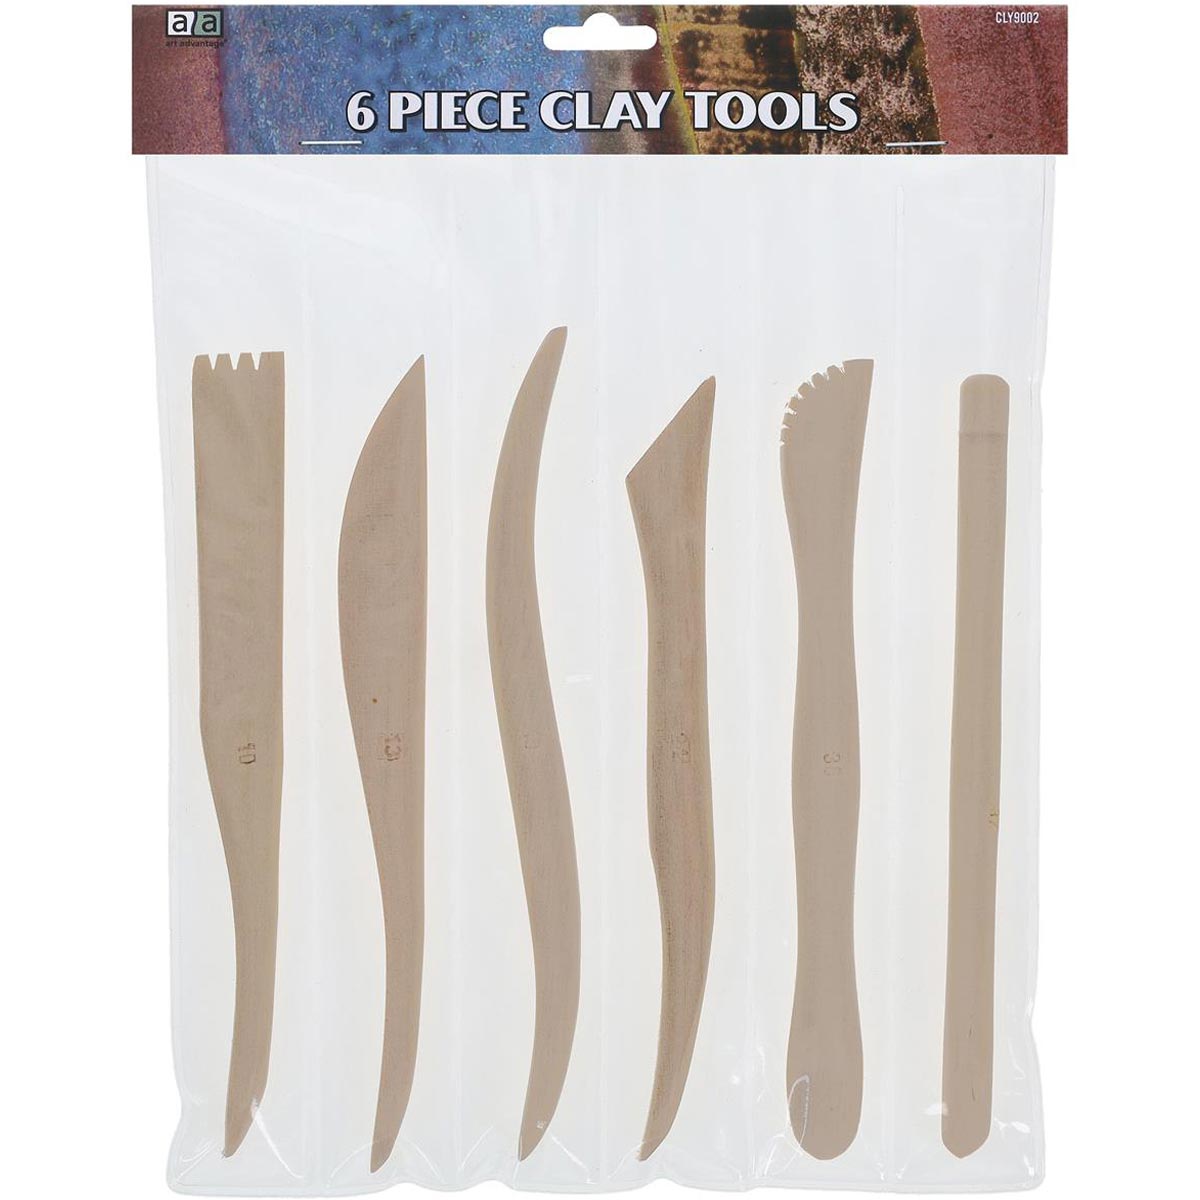 Paragon Crafts 3 Piece Clay Tools Wire Based Pottery Sculpting Ceramics  Art, Must Have Tool for Polymer Sculpture Making Modeling Carving Scoring  Wax Kit Molds Blocks Jewelry : : Office Products